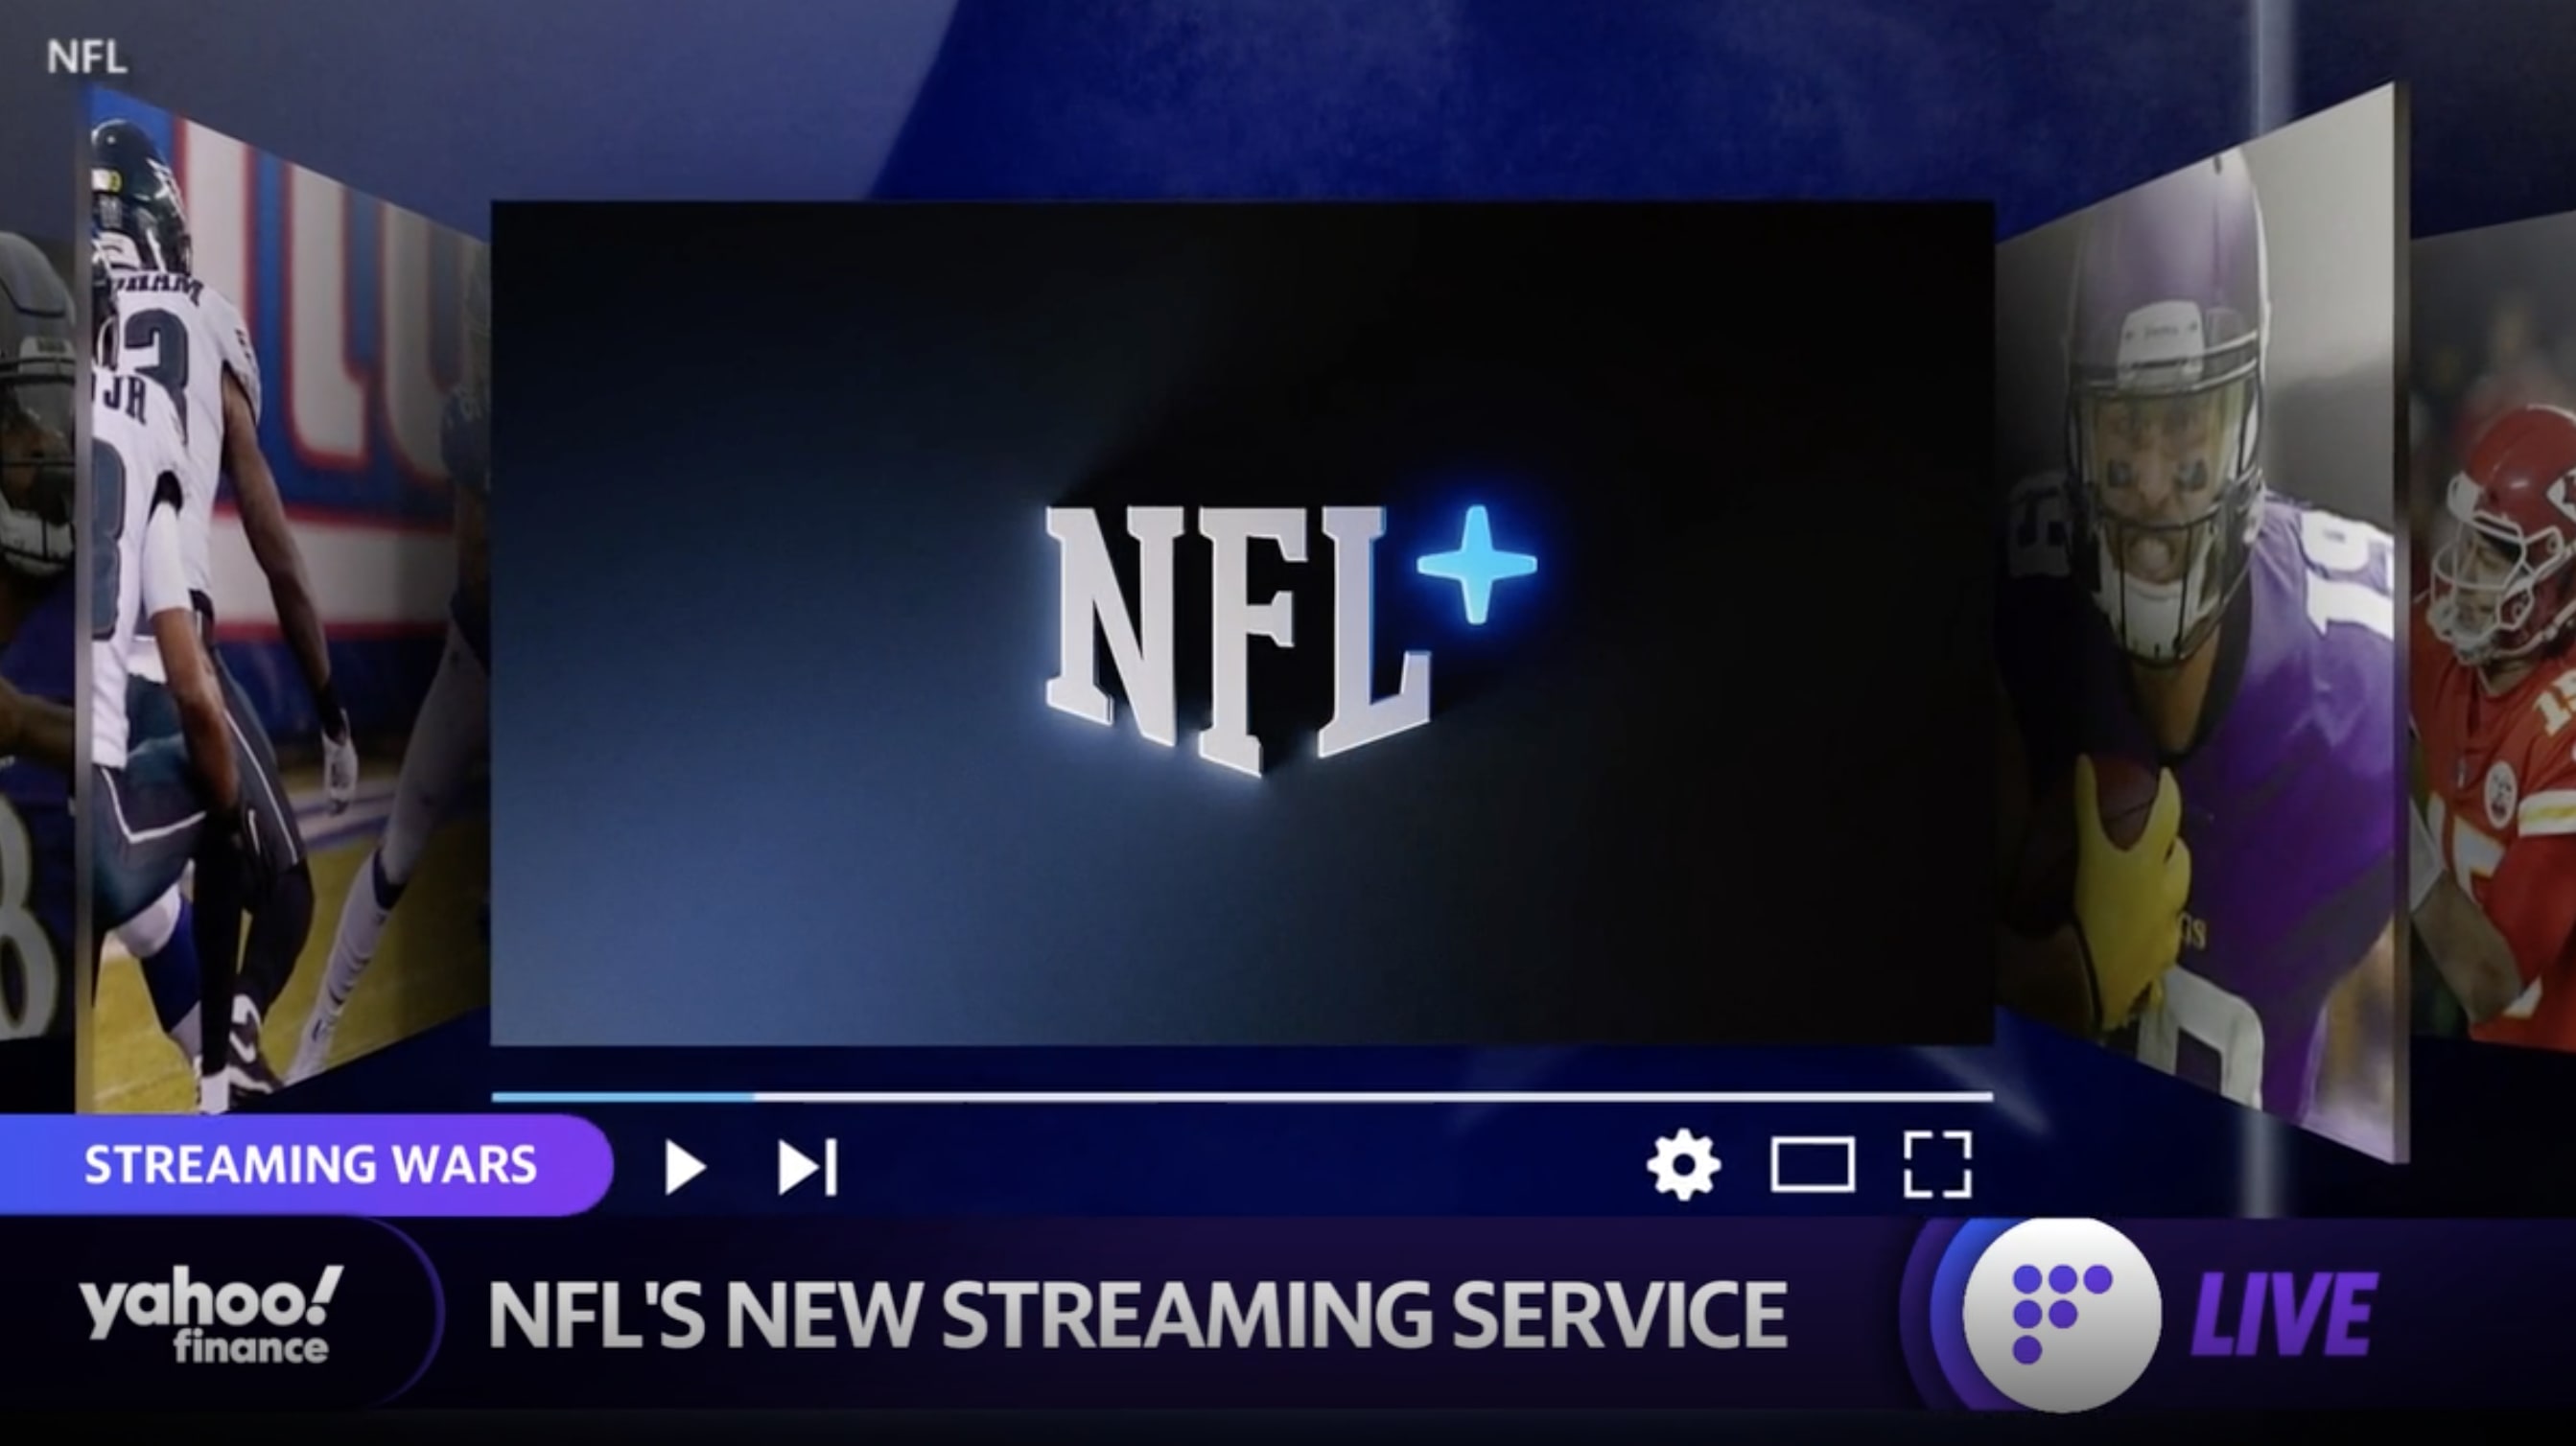 NFL+ streaming service launches in the US, replacing NFL Game Pass